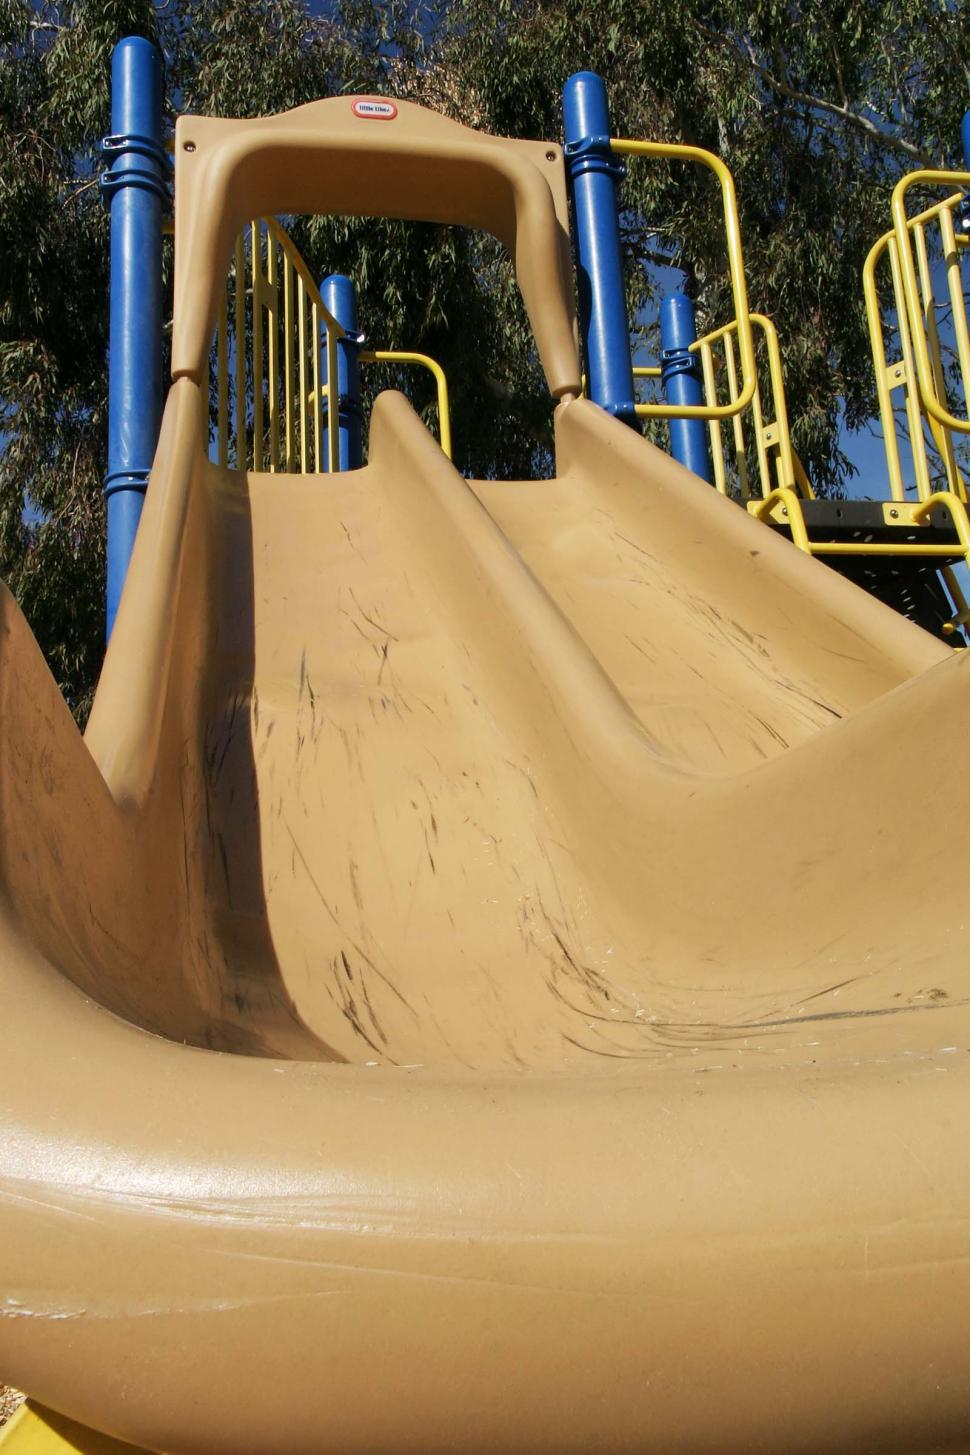 Free Image of Large Slide in Playground With Trees Background 